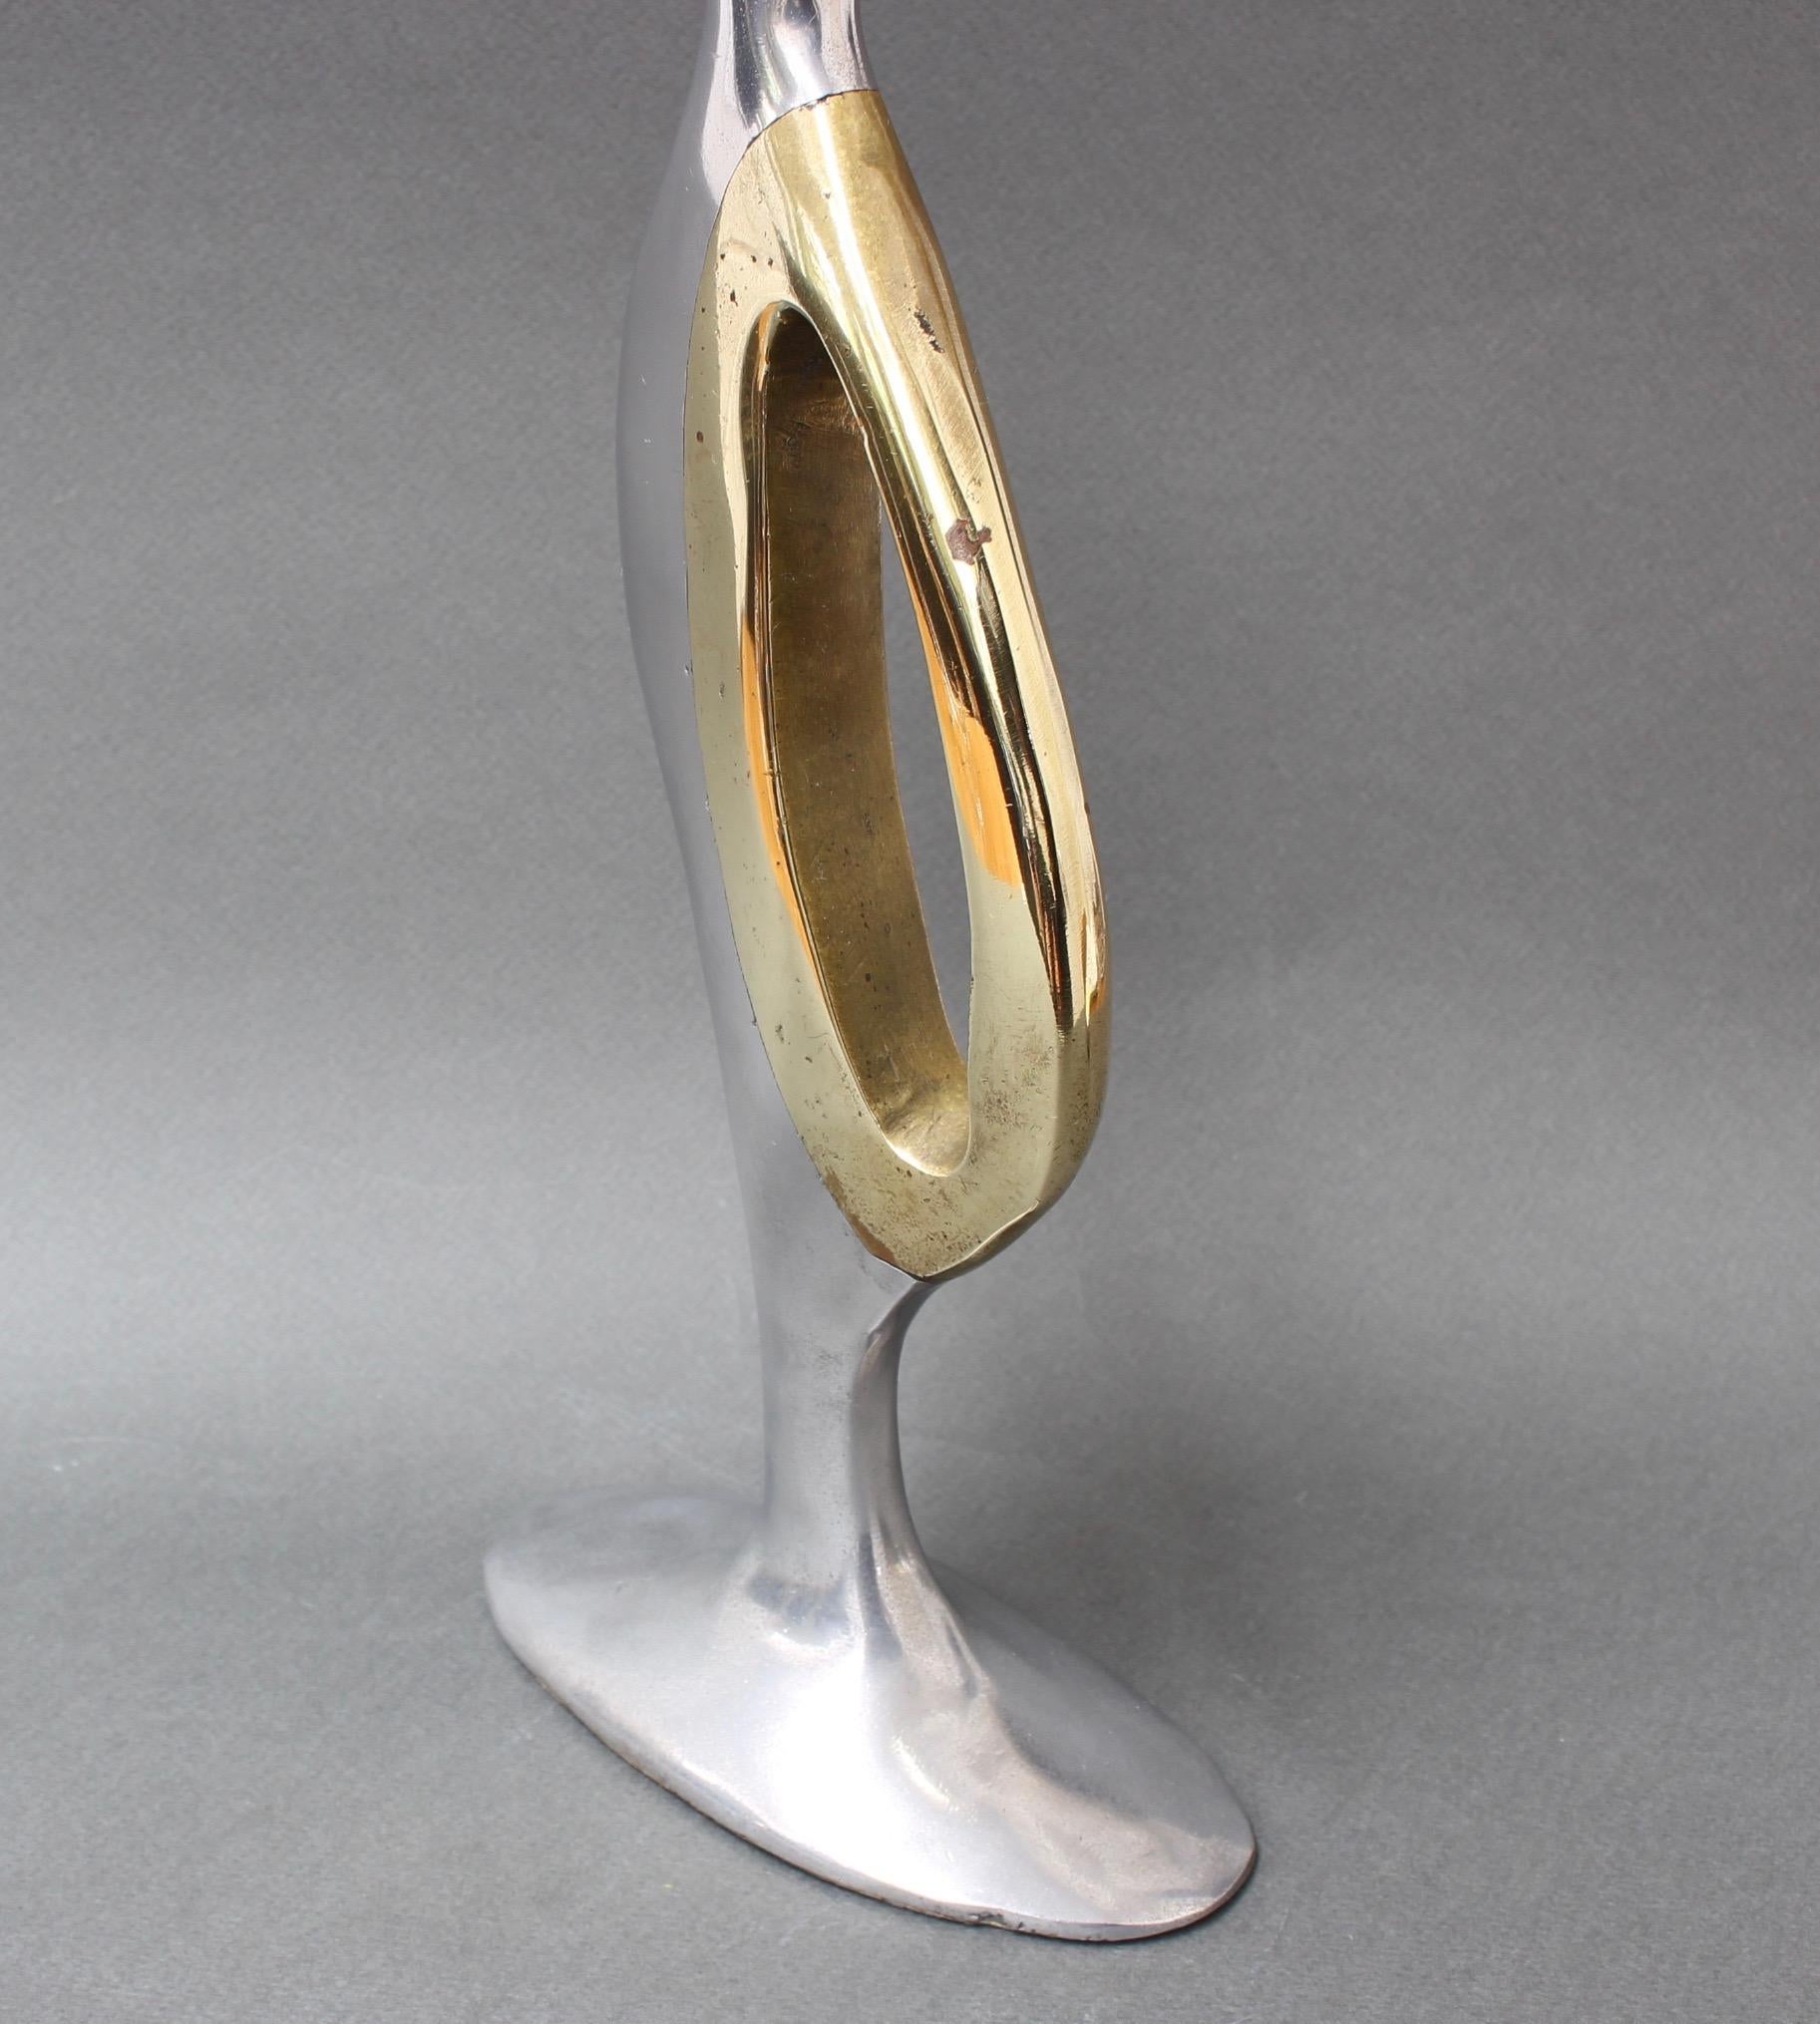 Aluminium and Brass Brutalist Style Candleholder by Leopold, s.c, 'circa 1970s' 6